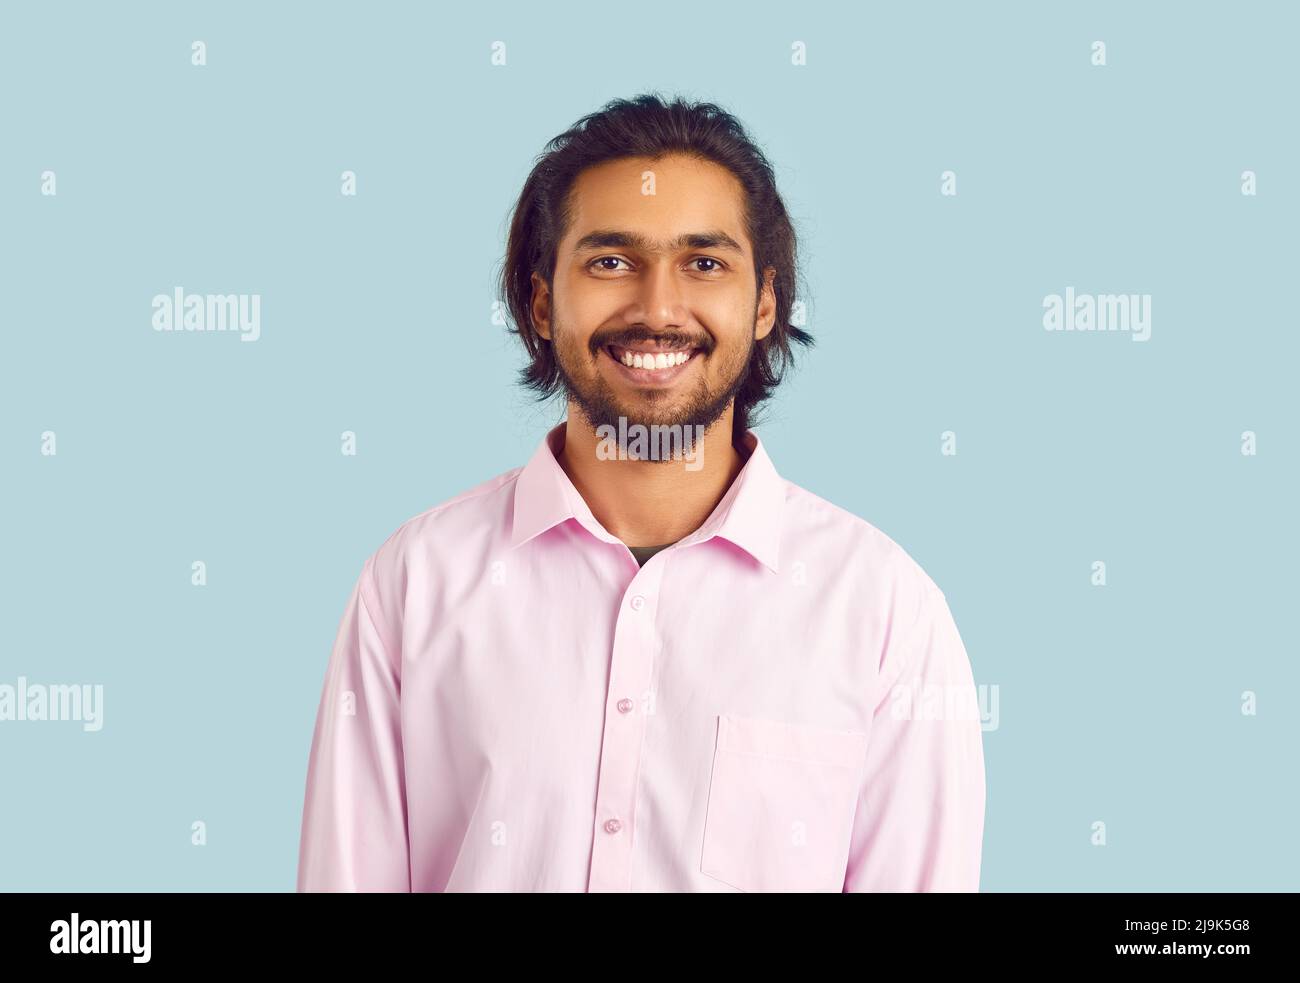 Portrait of happy Indian man with beautiful snow-white smile on pastel light blue background. Stock Photo